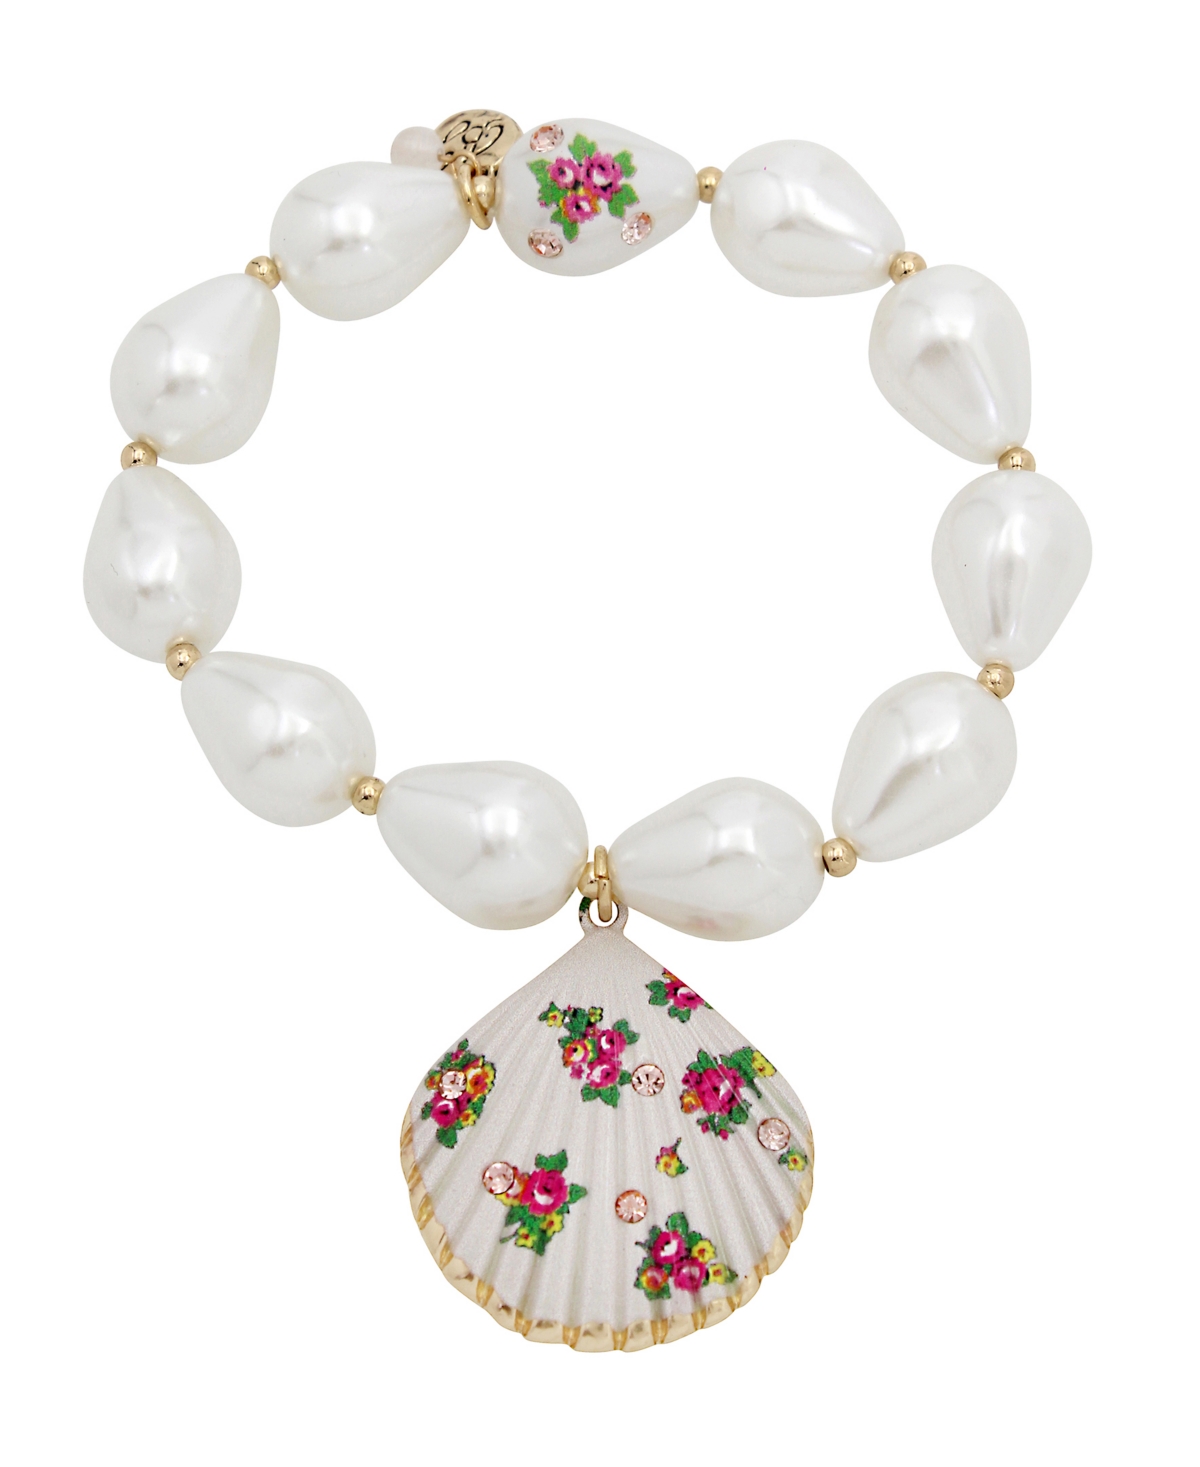 Betsey Johnson Faux Stone Floral Shell Imitation Pearl Stretch Bracelet In White,gold